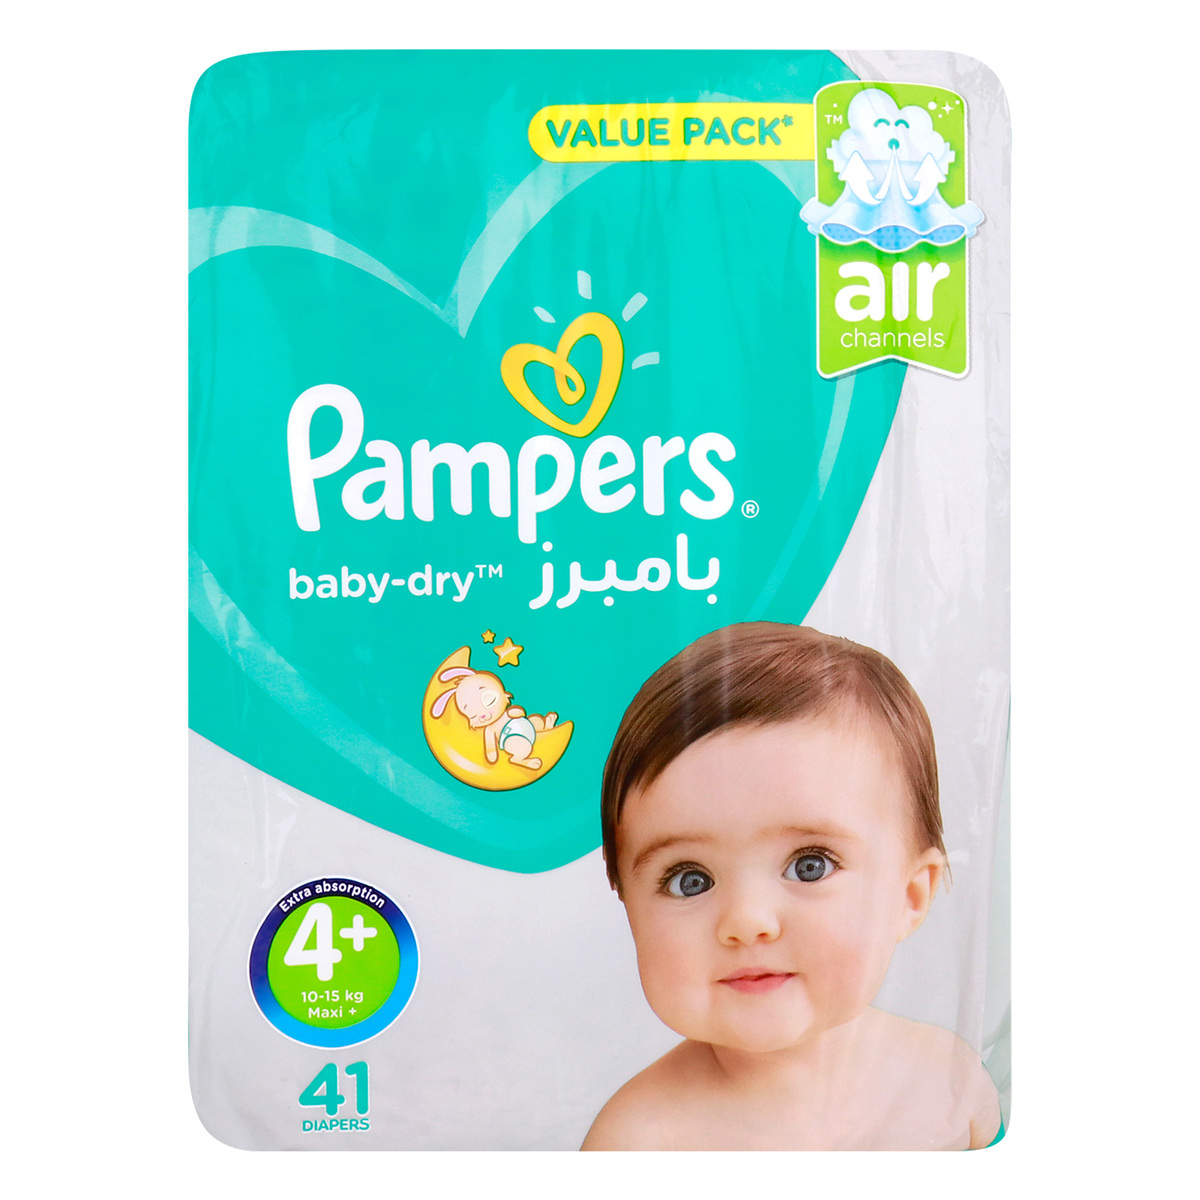 Productie Trekken Malaise Pampers Baby Dry Diapers Size 4+, Maxi 10-15kg Value Pack 41pcs Online at  Best Price | Mother & Baby Promotion | Lulu Qatar